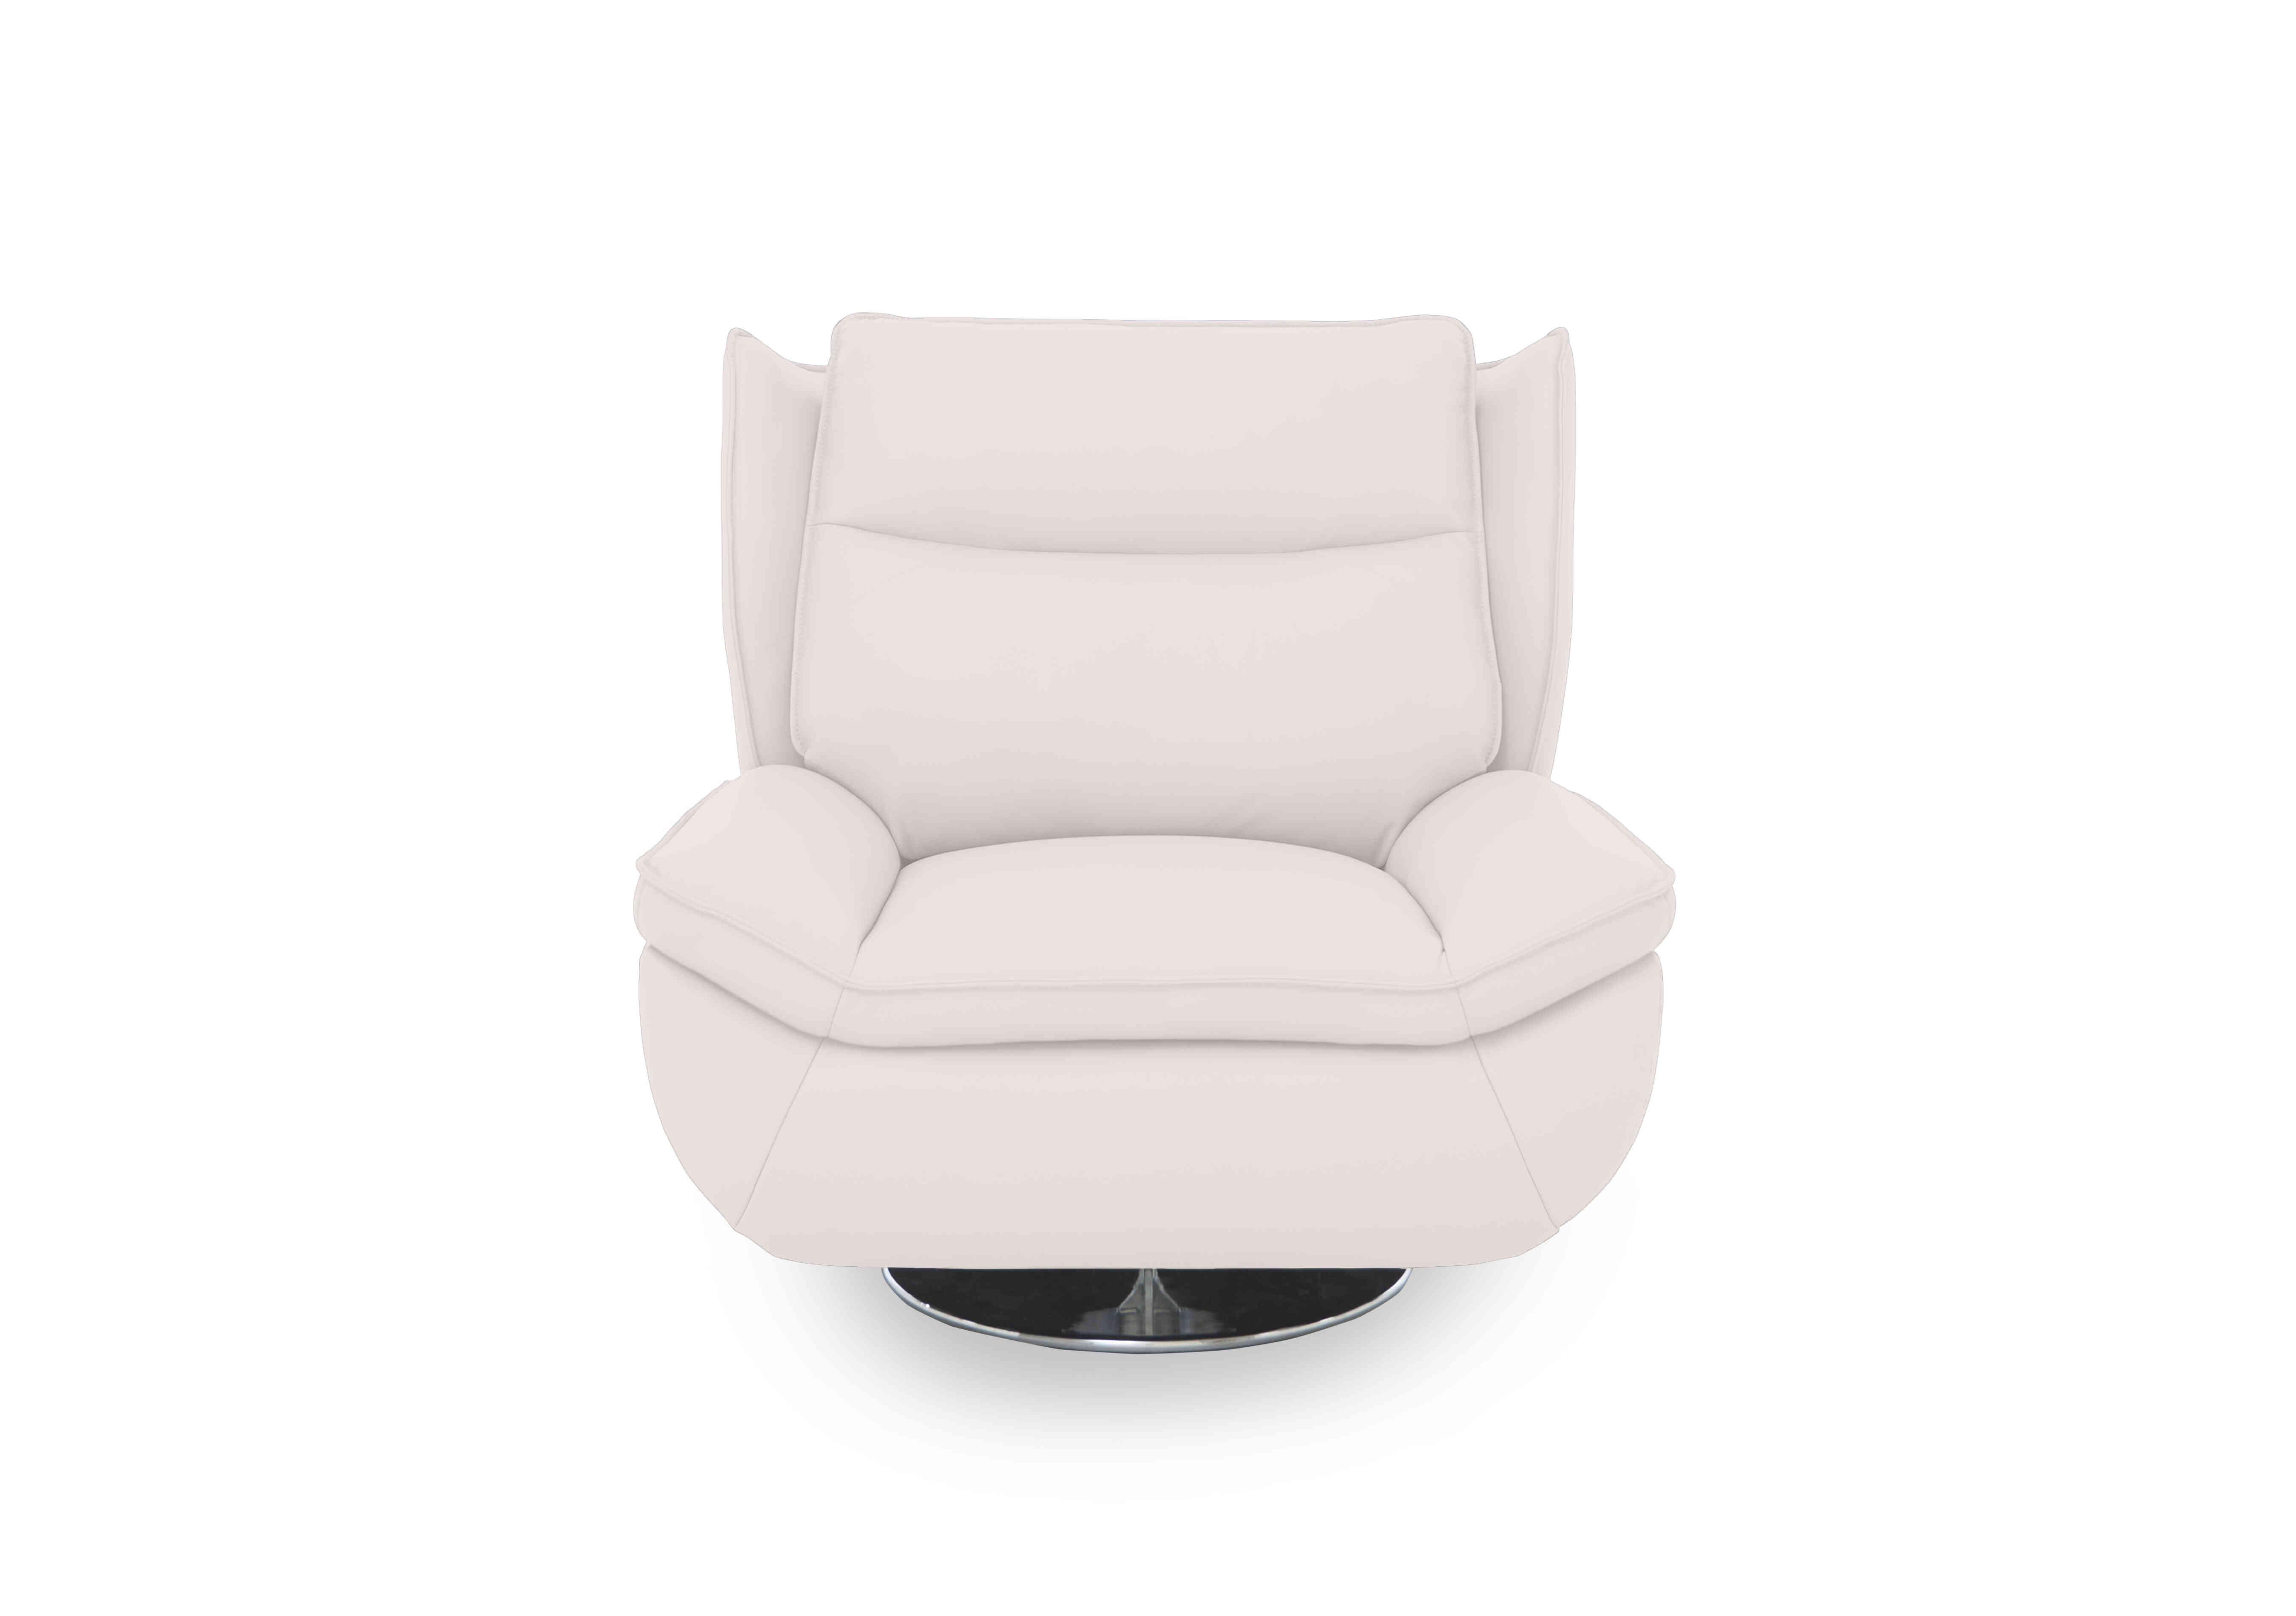 Vinny Leather Swivel Chair in Cat-40/13 Cotton on Furniture Village